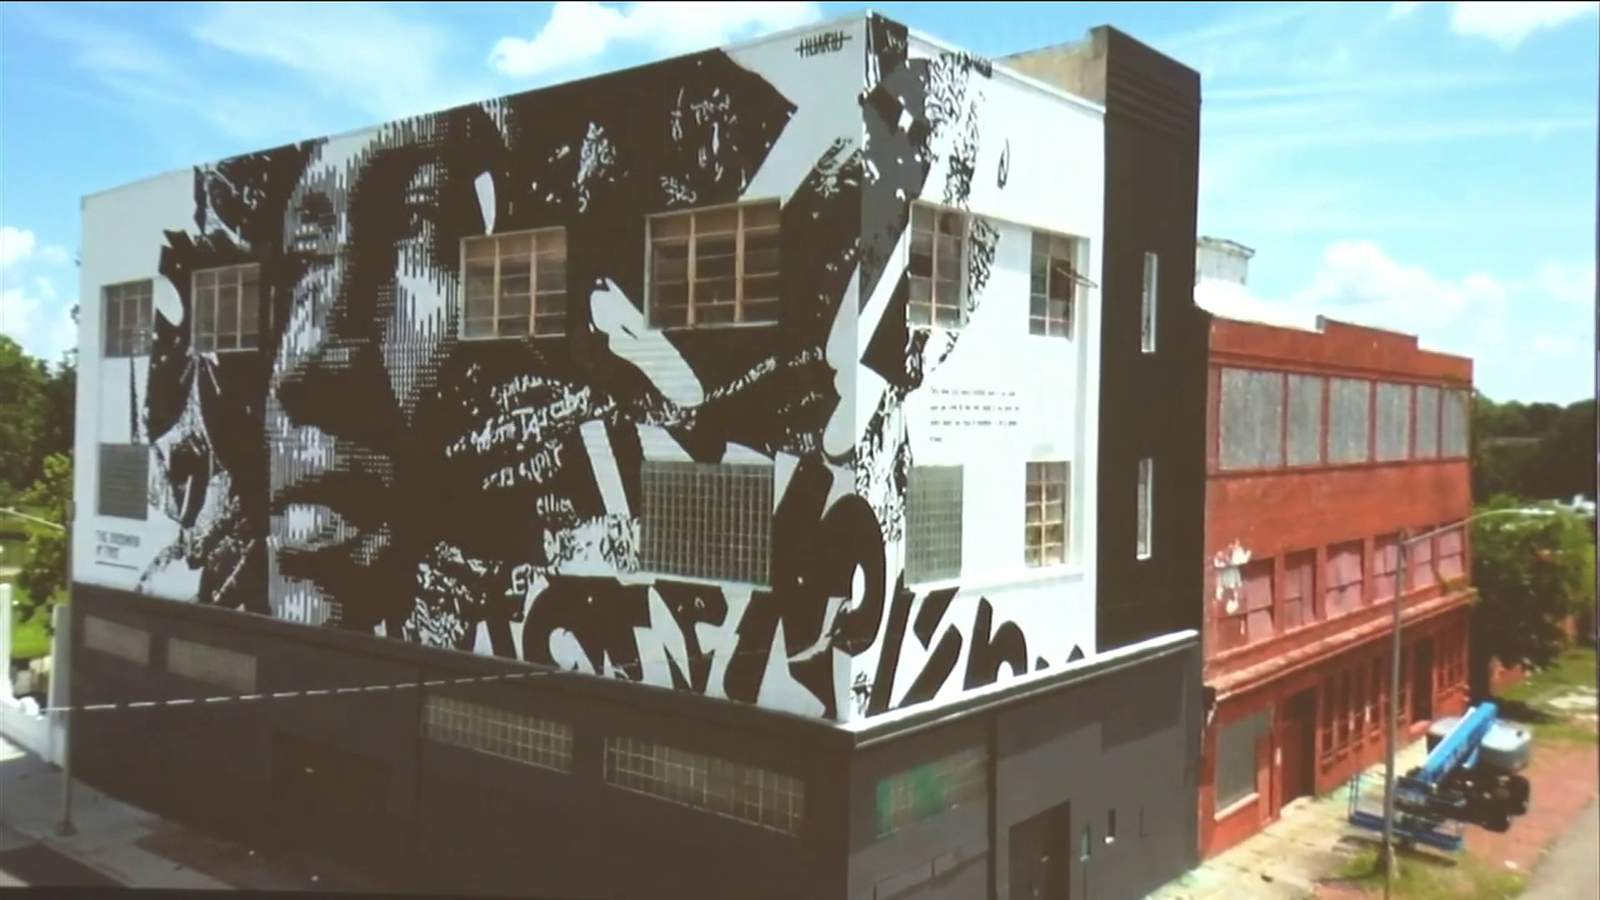 ‘Lift Every Voice’ project aims to represent Jacksonville through art